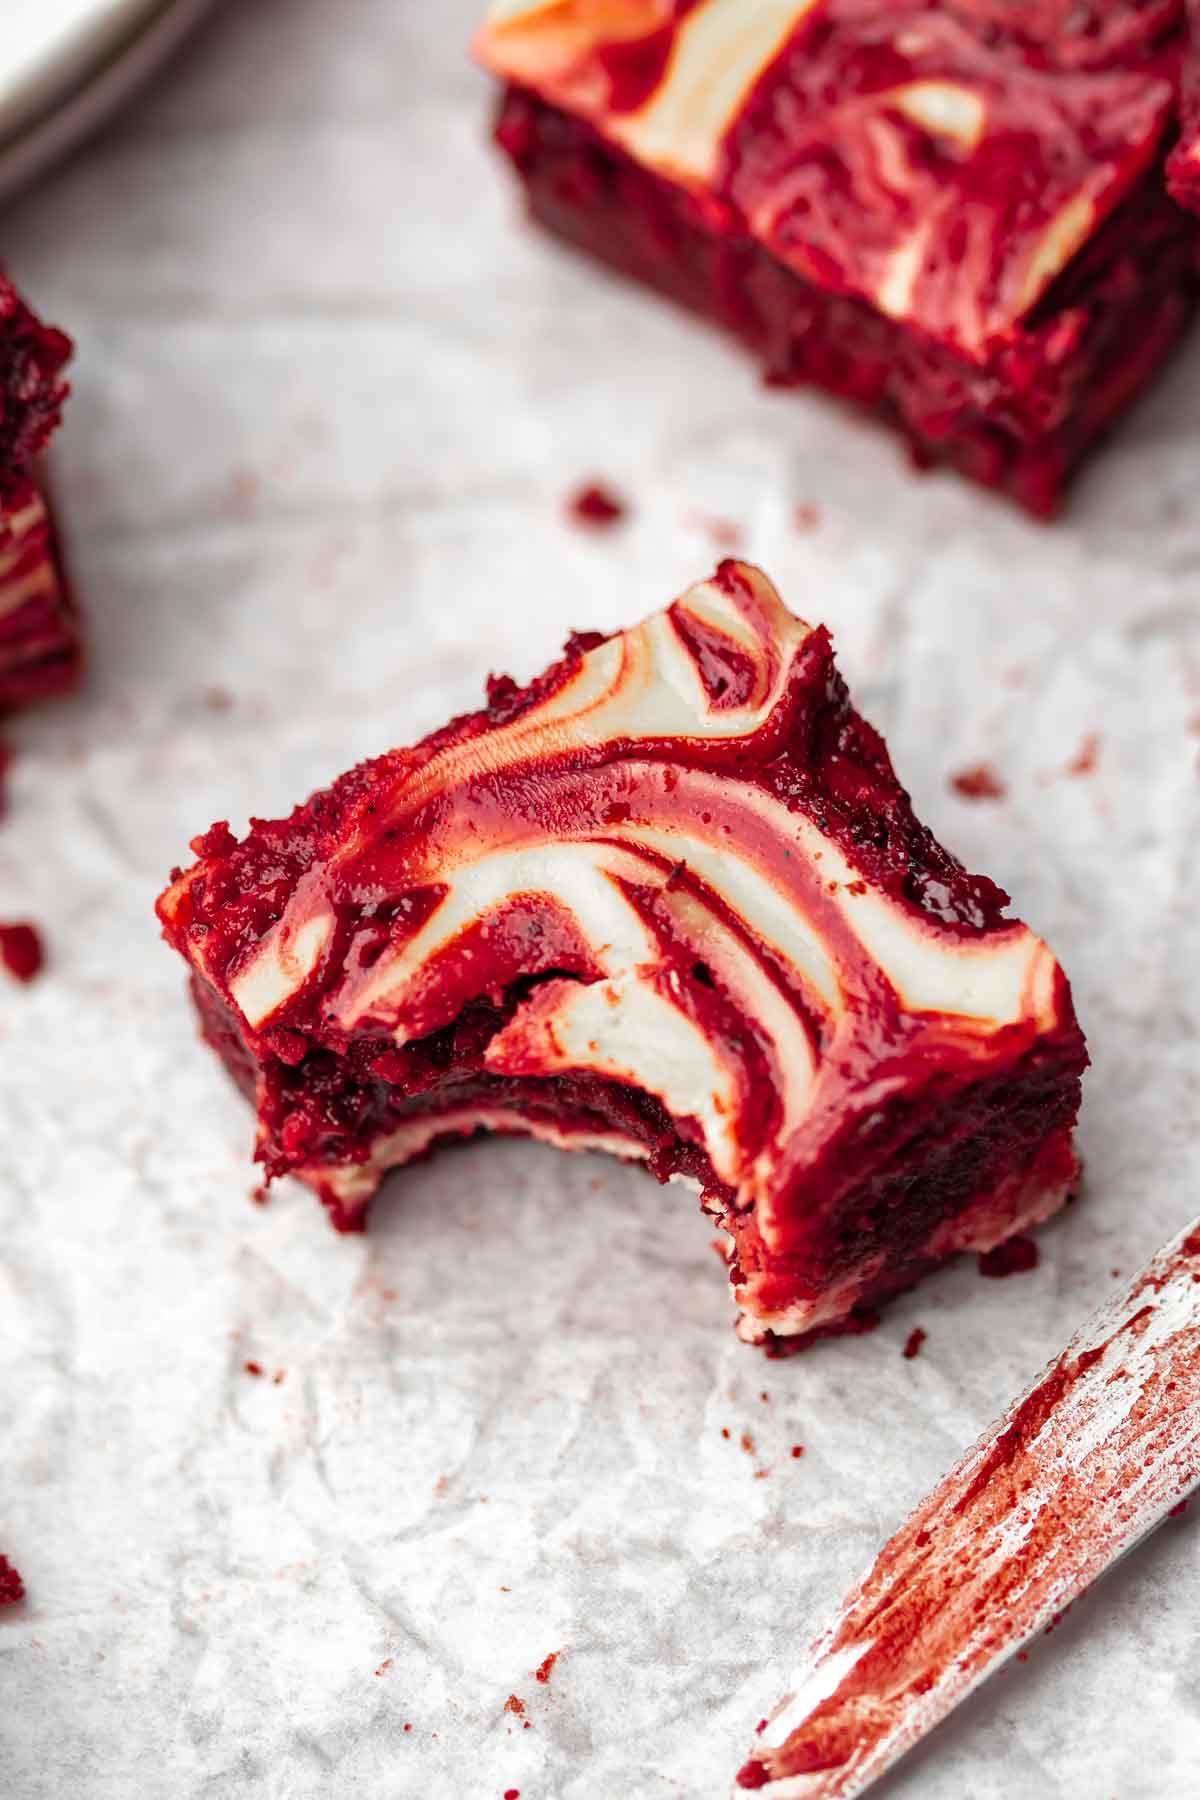 A red velvet brownie with a bite taken out of the corner.